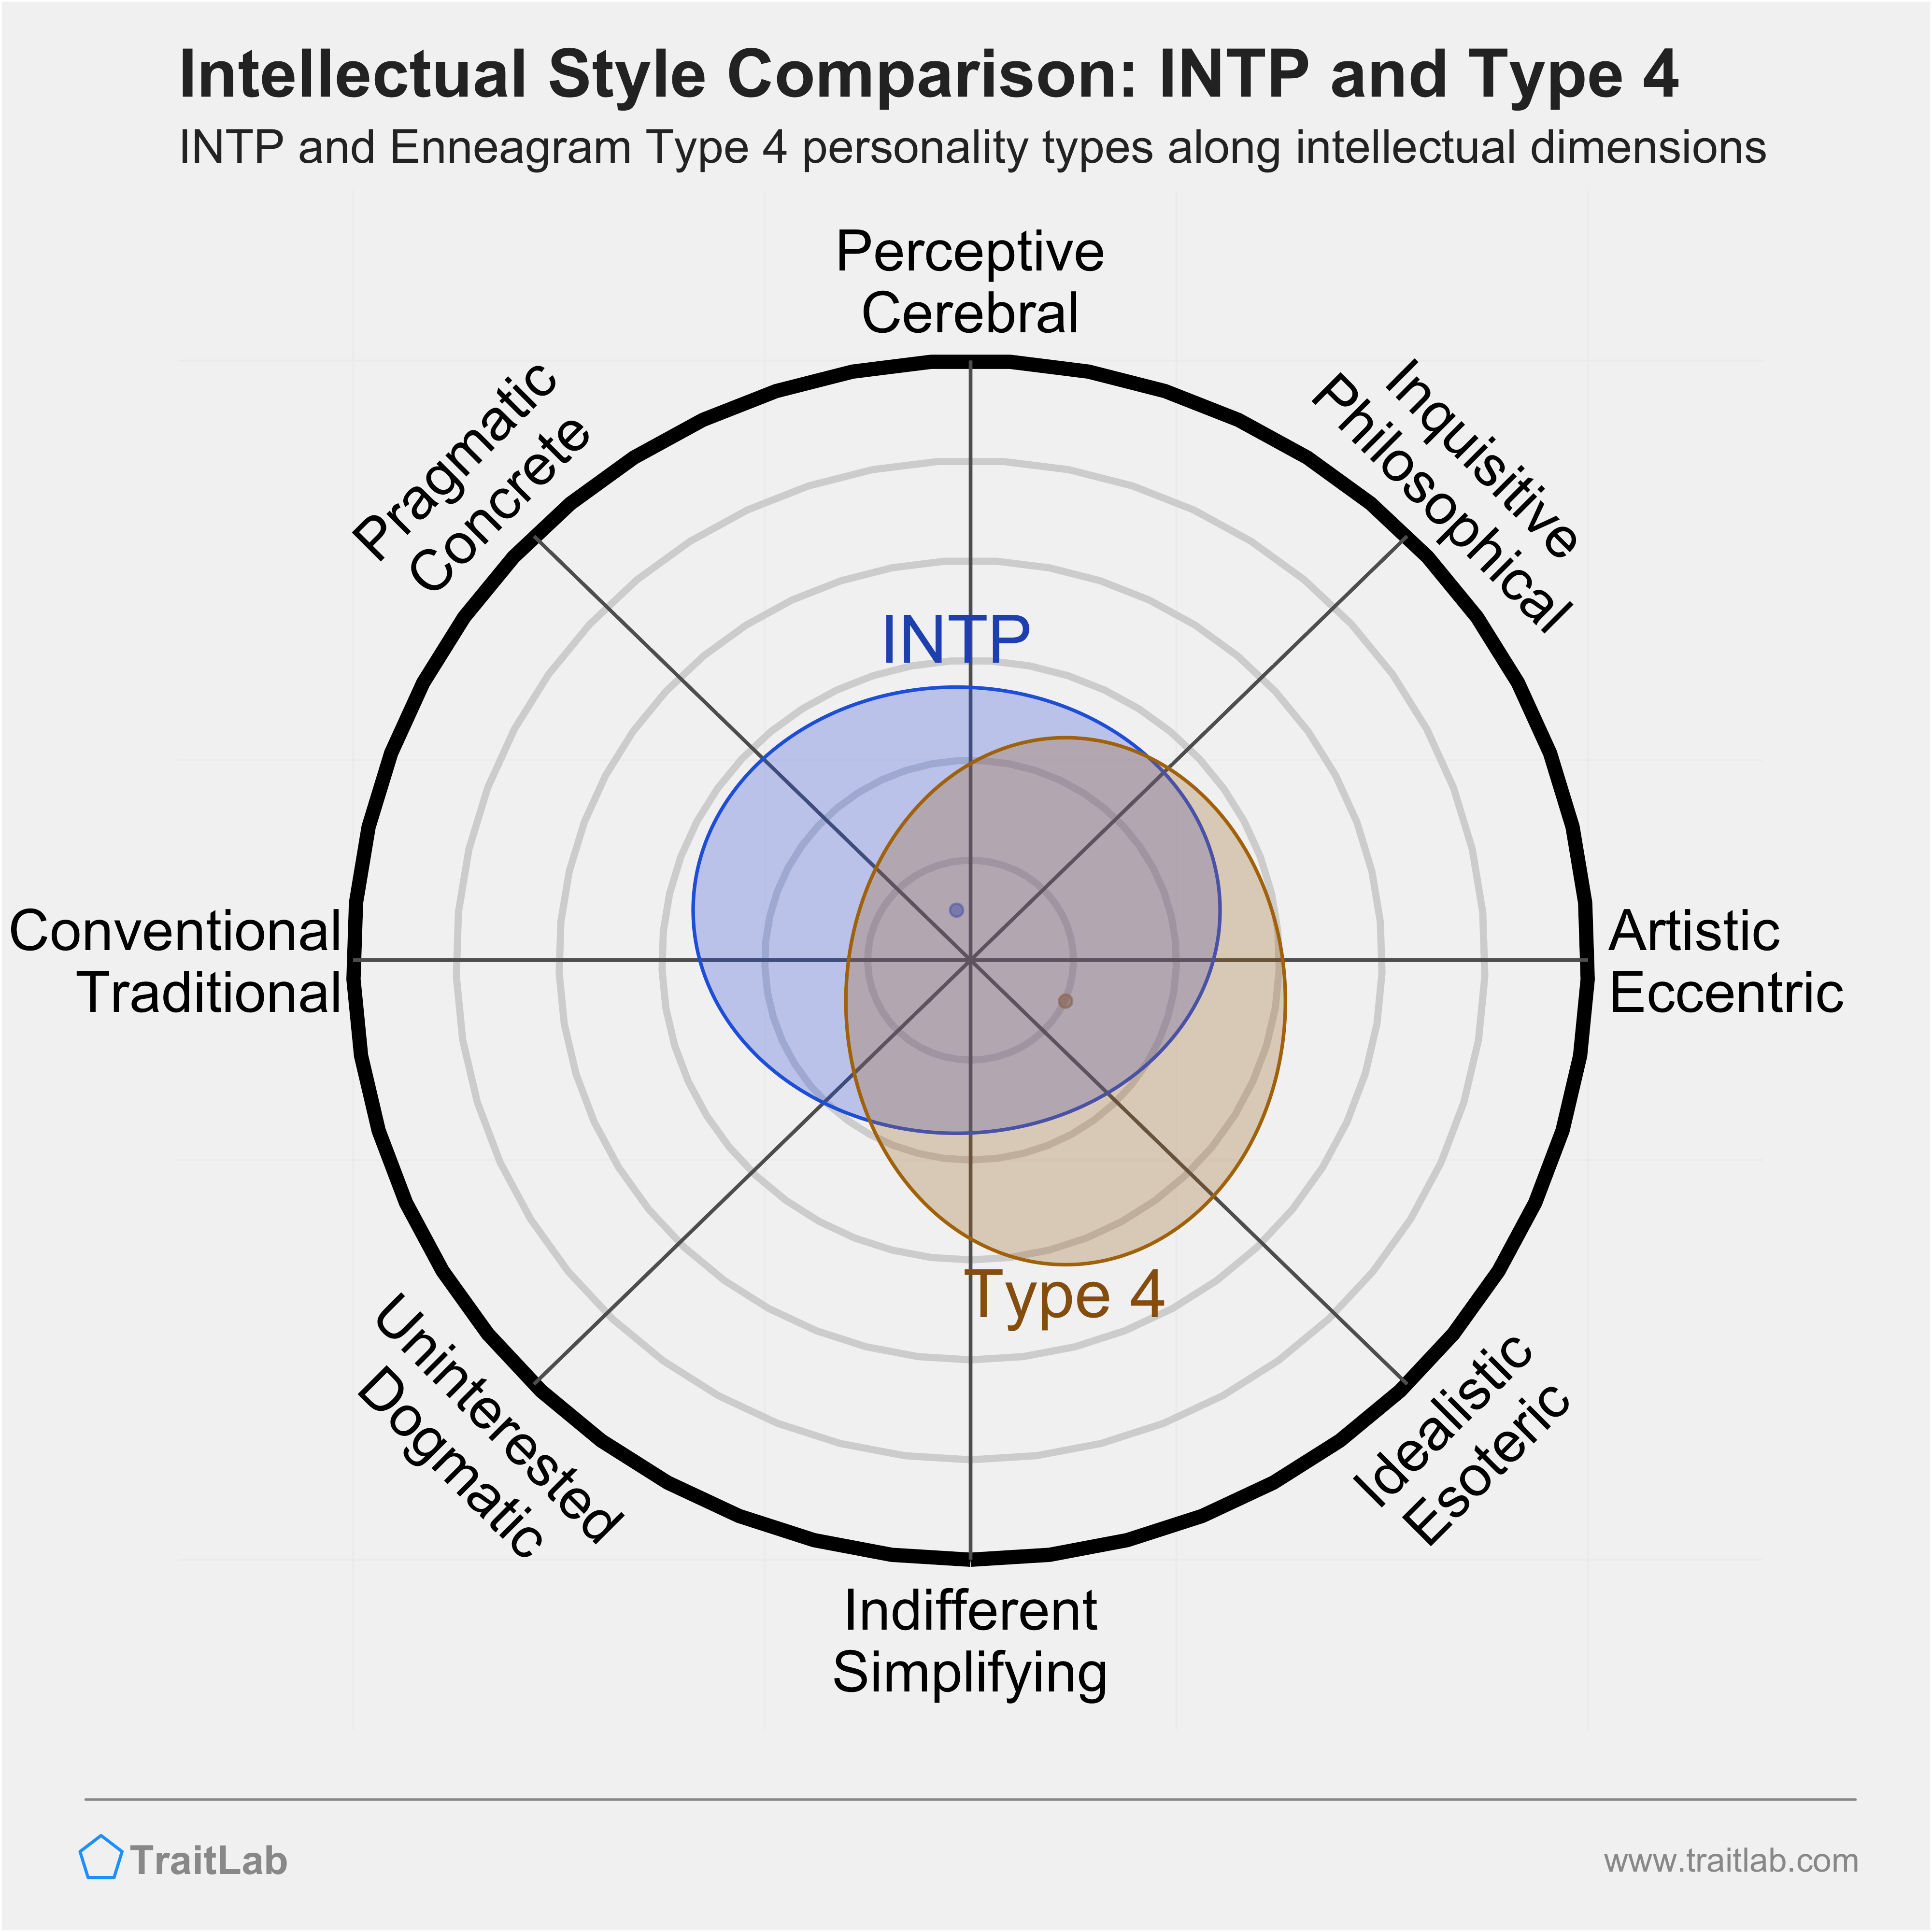 INTP and Type 4 comparison across intellectual dimensions